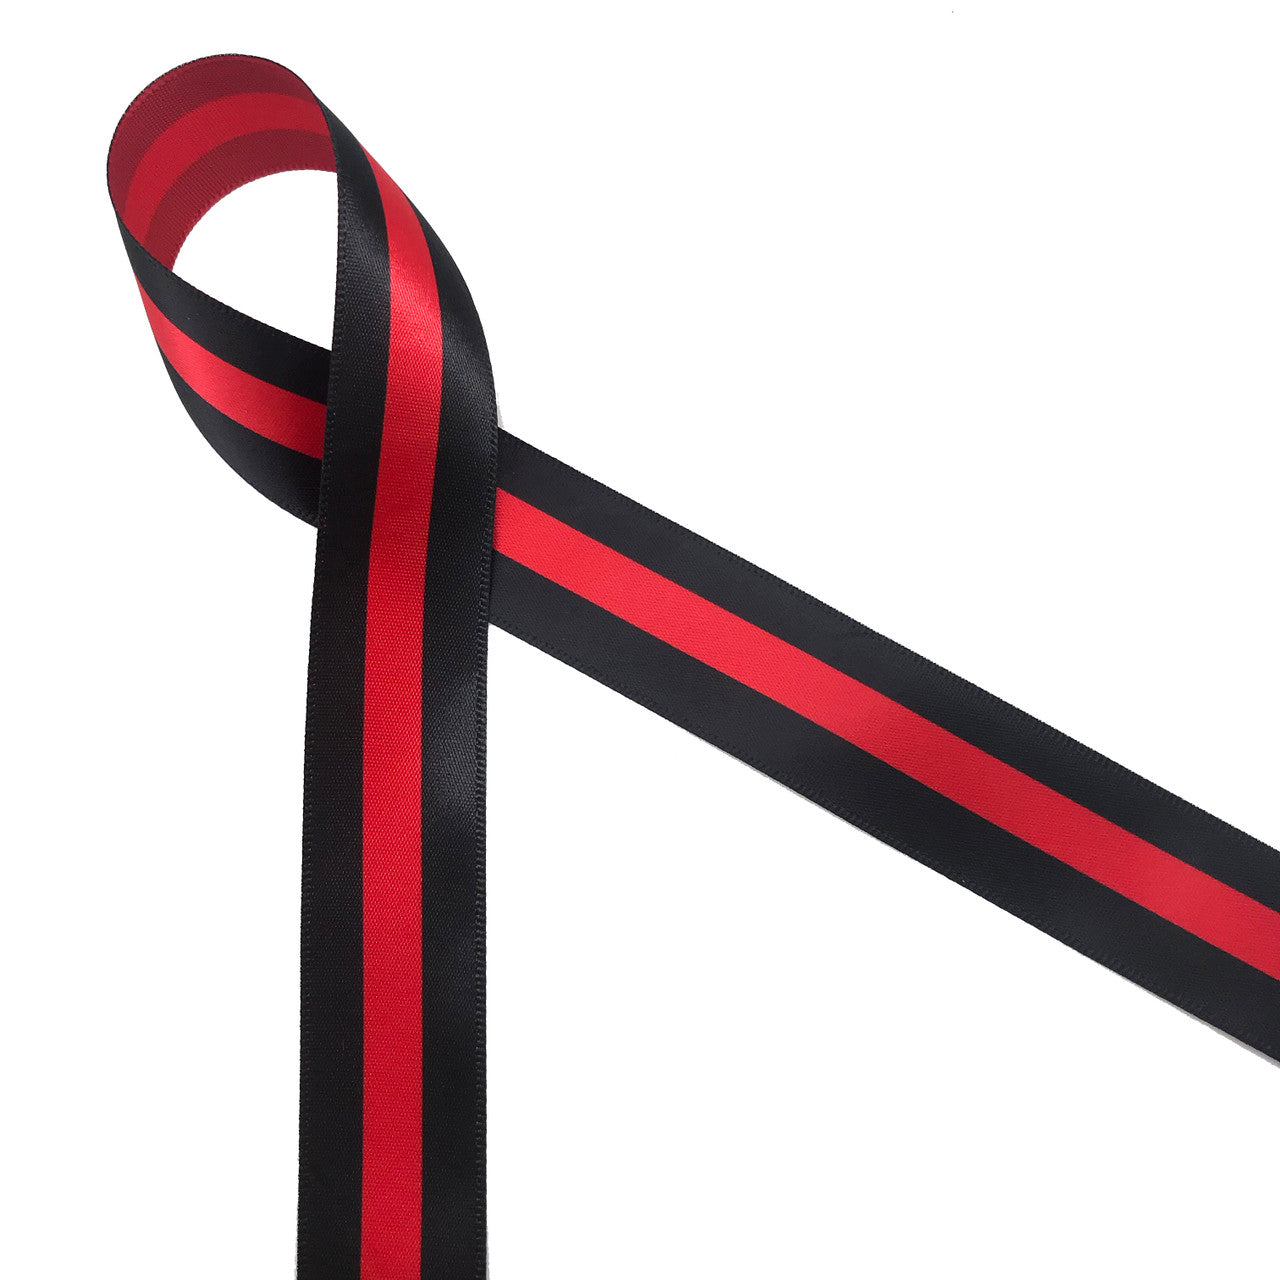 Thin red line ribbon printed with two black lines on 7/8" Red single face satin ribbon. This ribbon is meant to honor those firefighters fallen in the line of duty. This  is  an ideal ribbon for lanyards, memorial services, retirement parties and gifts. All our ribbon is designed and printed  in the USA